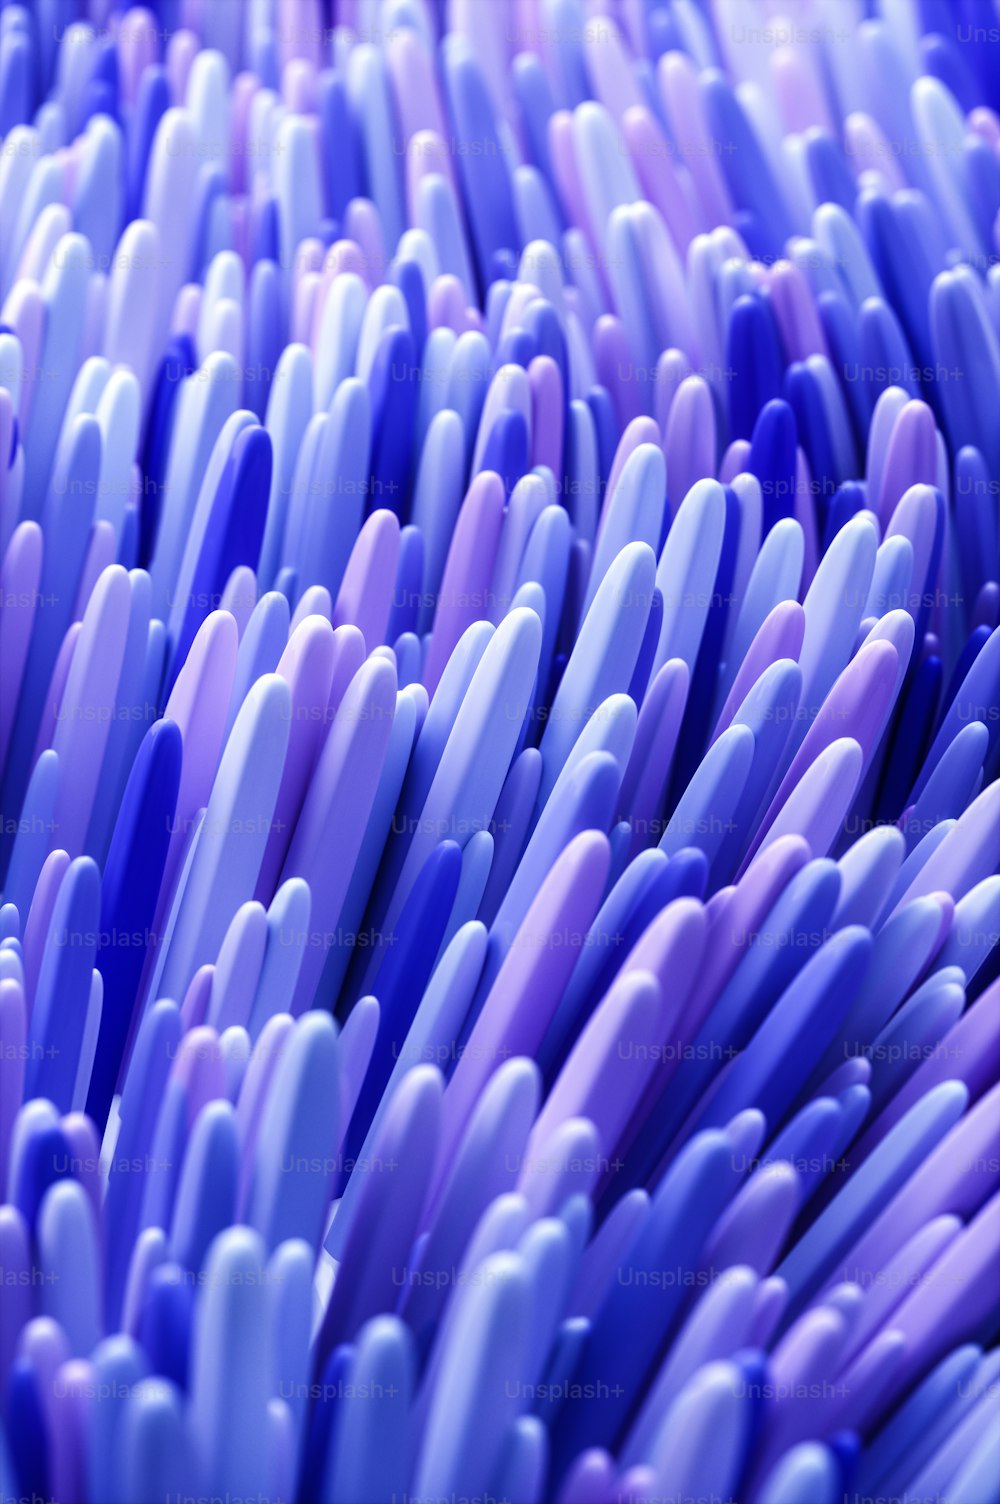 a close up of a bunch of blue and purple toothbrushes